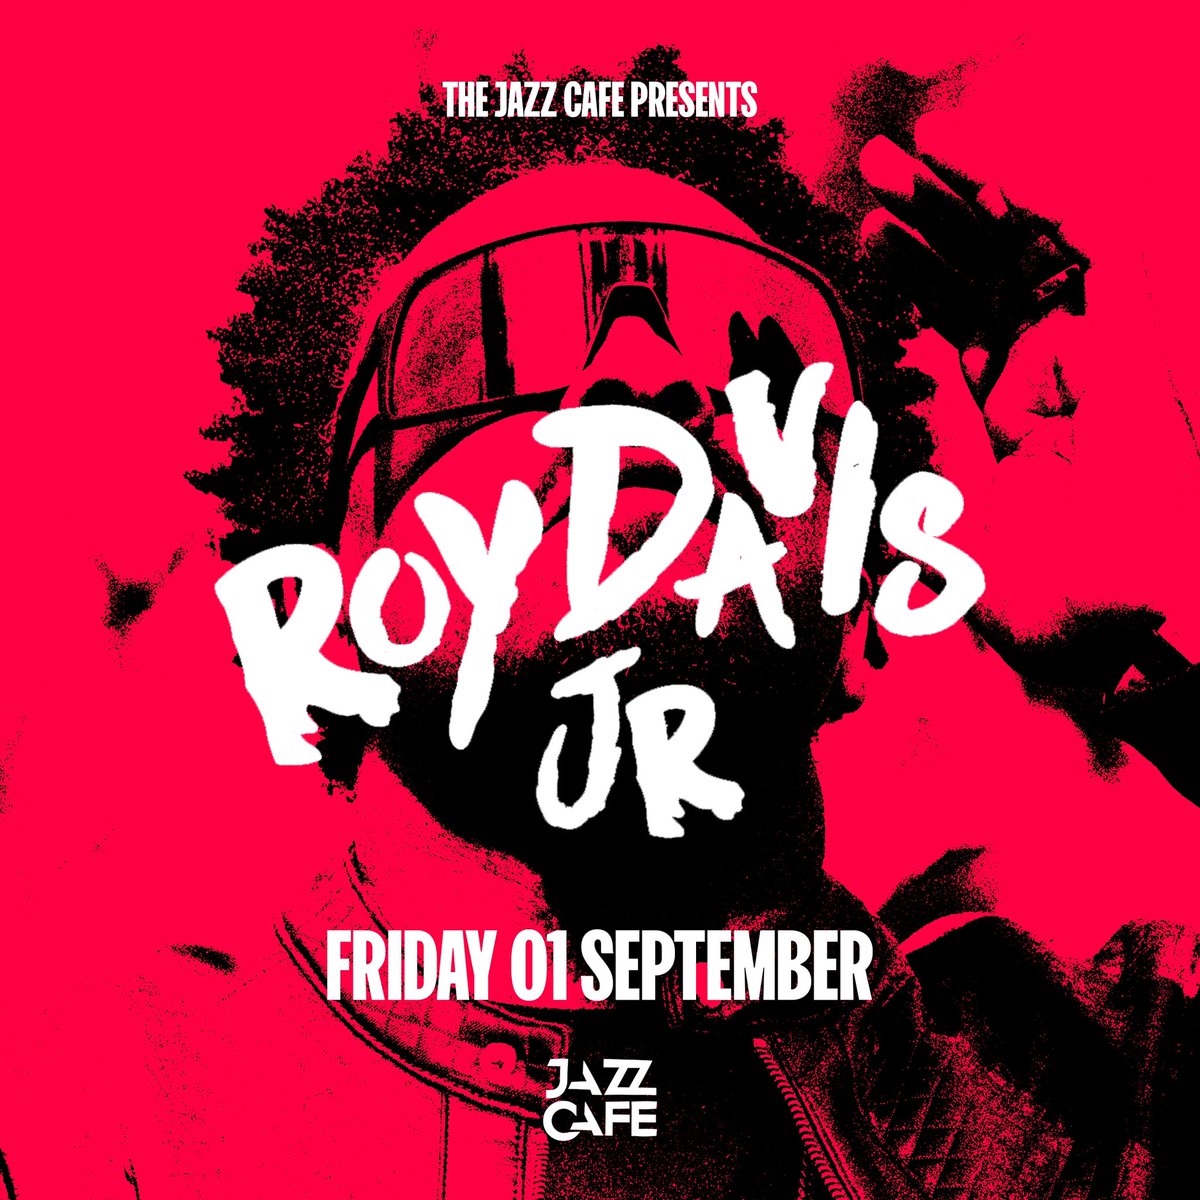 London, it’s been 3 years. I’m back in September. Let’s dance. @TheJazzCafe Tickets here: ra.co/events/1740586